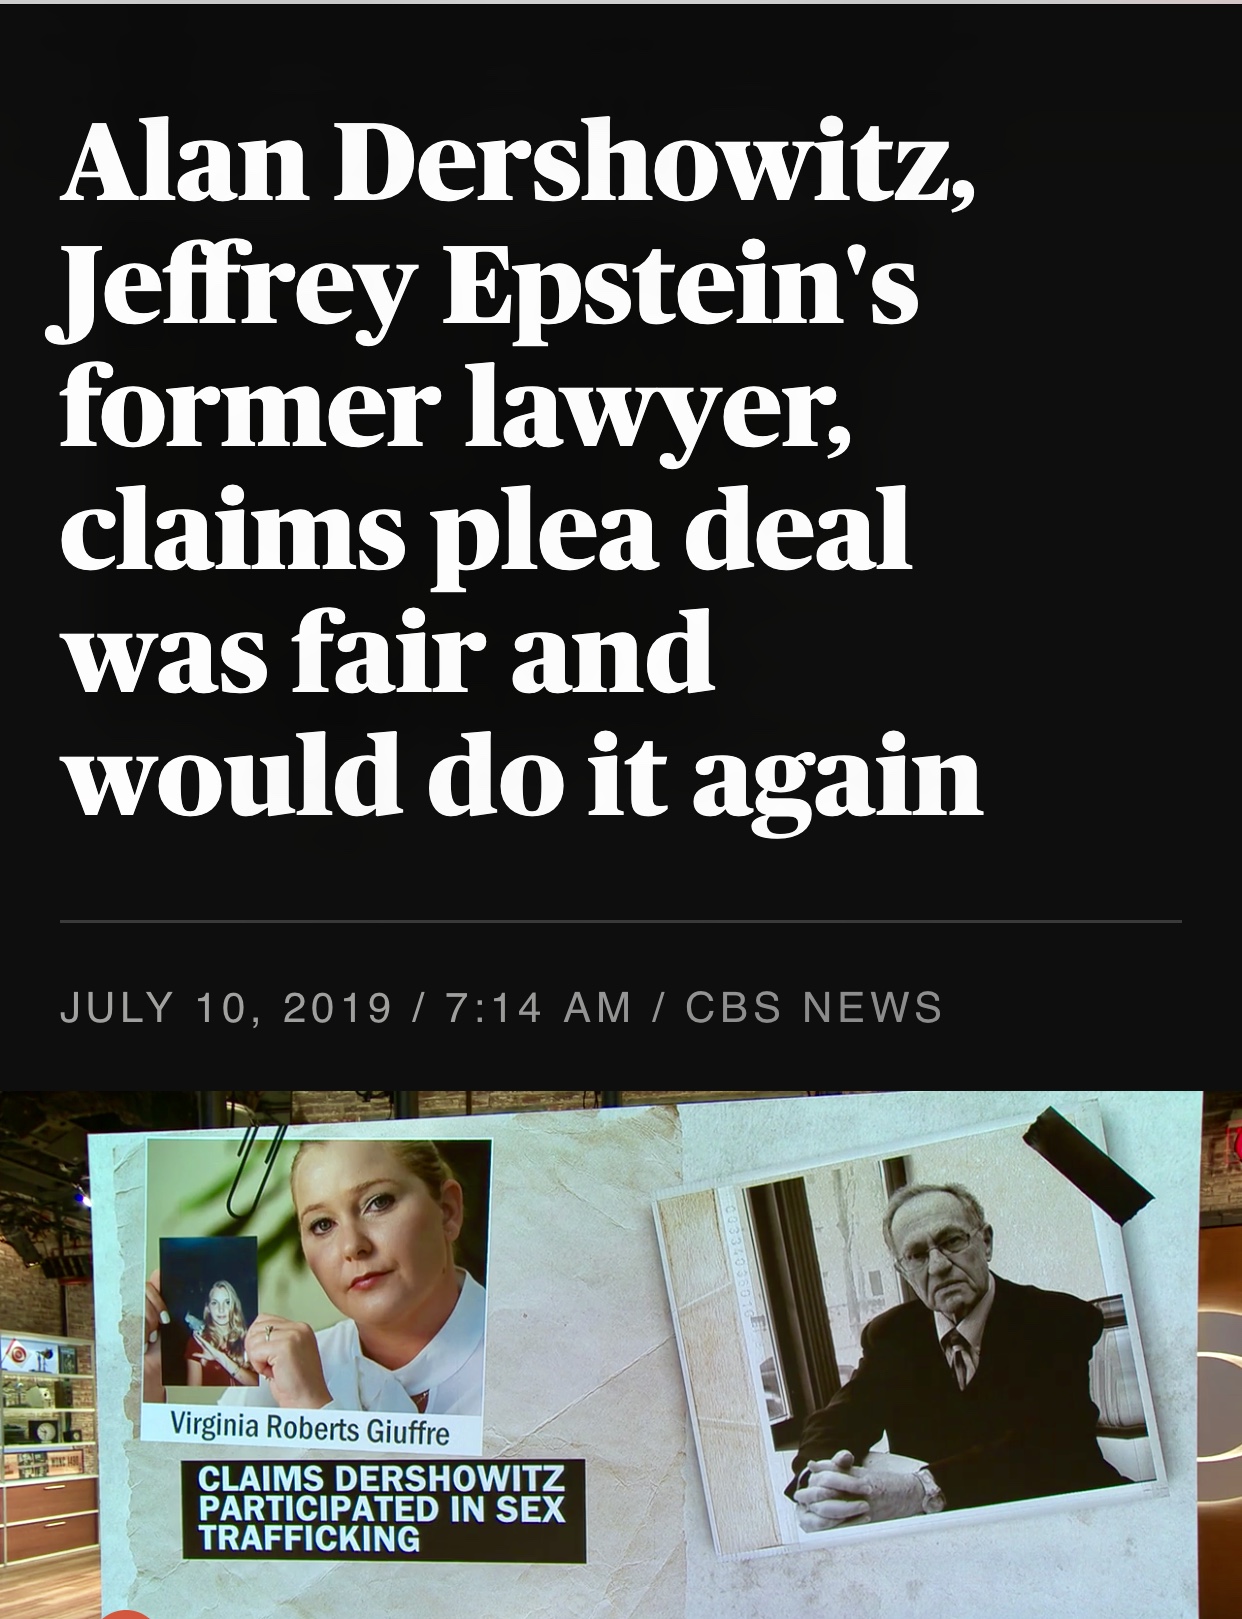 Alan Dershowitz, Jeffrey Epstein’s former lawyer, claims plea deal was fair and would do it again – CBS News